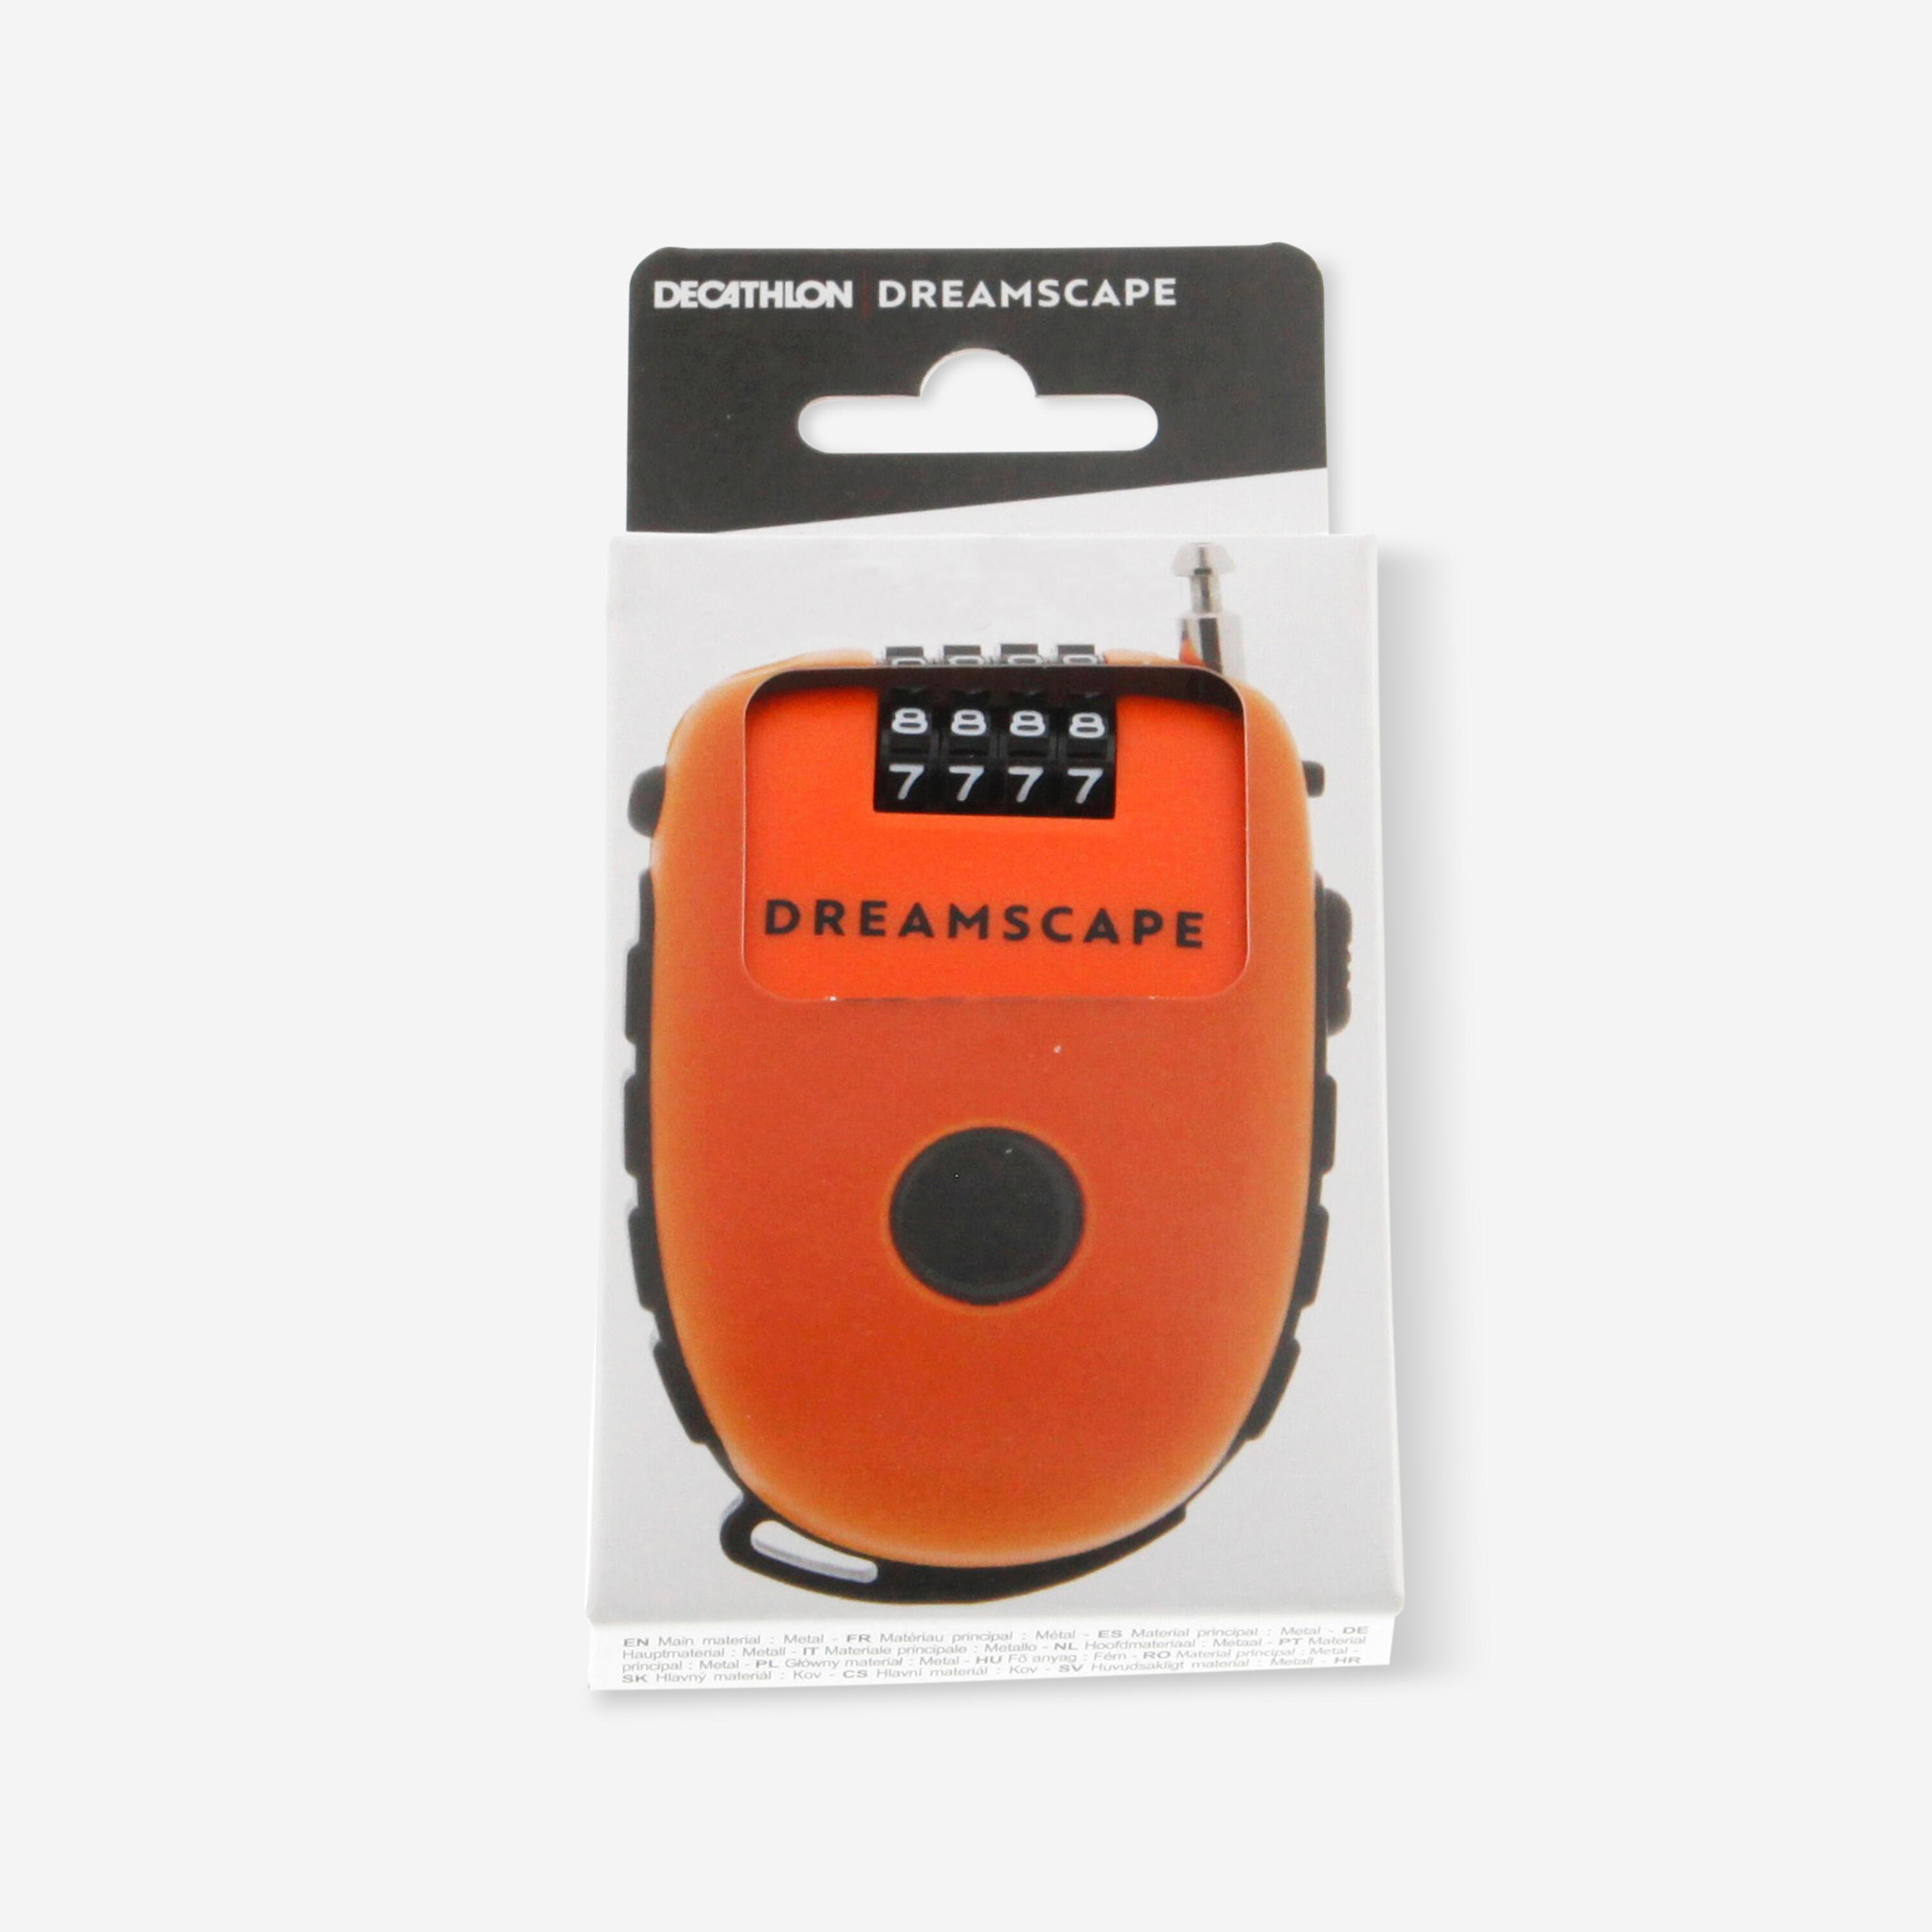 DREAMSCAPE Anti-theft lock for snowboard or pair of skis